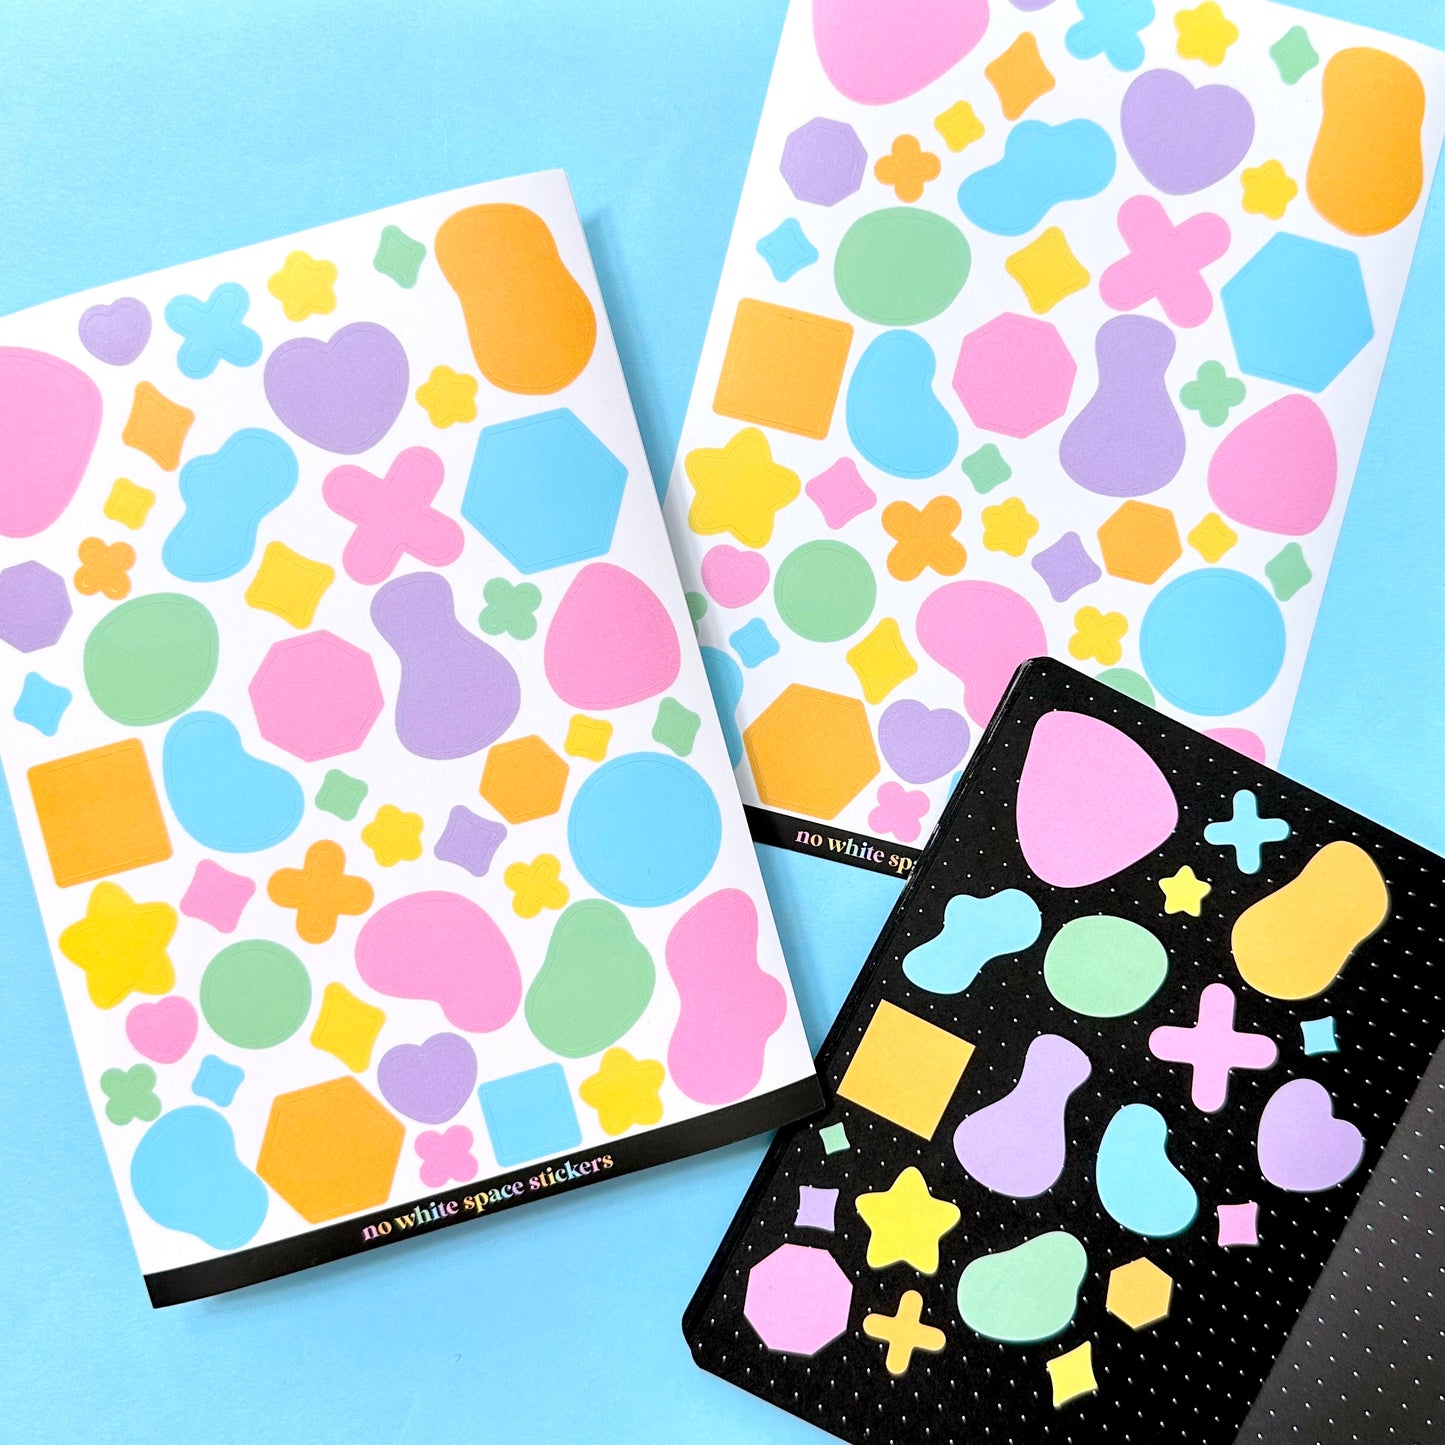 Journaling Abstract Shape Stickers - Pastel